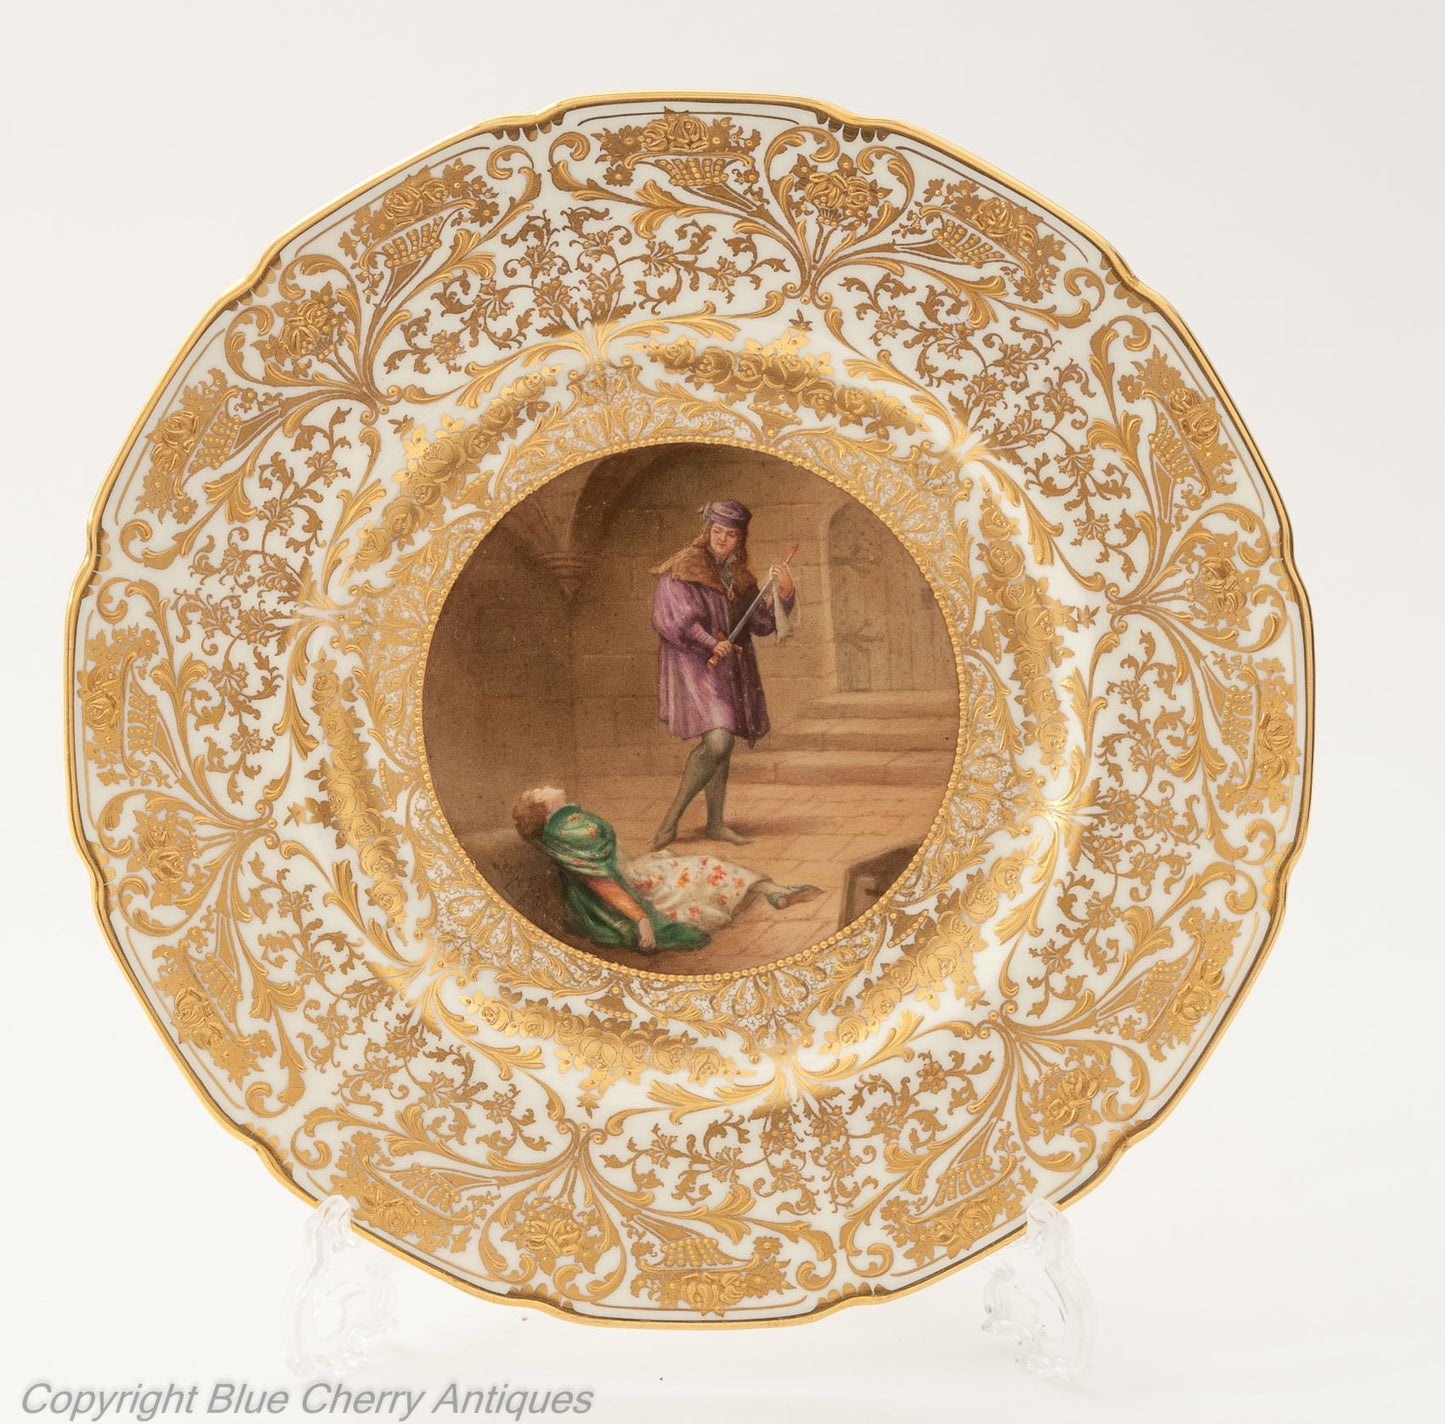 Antique Royal Doulton China Leslie Johnson Hand Painted Shakespeare Plate (Code 1762)